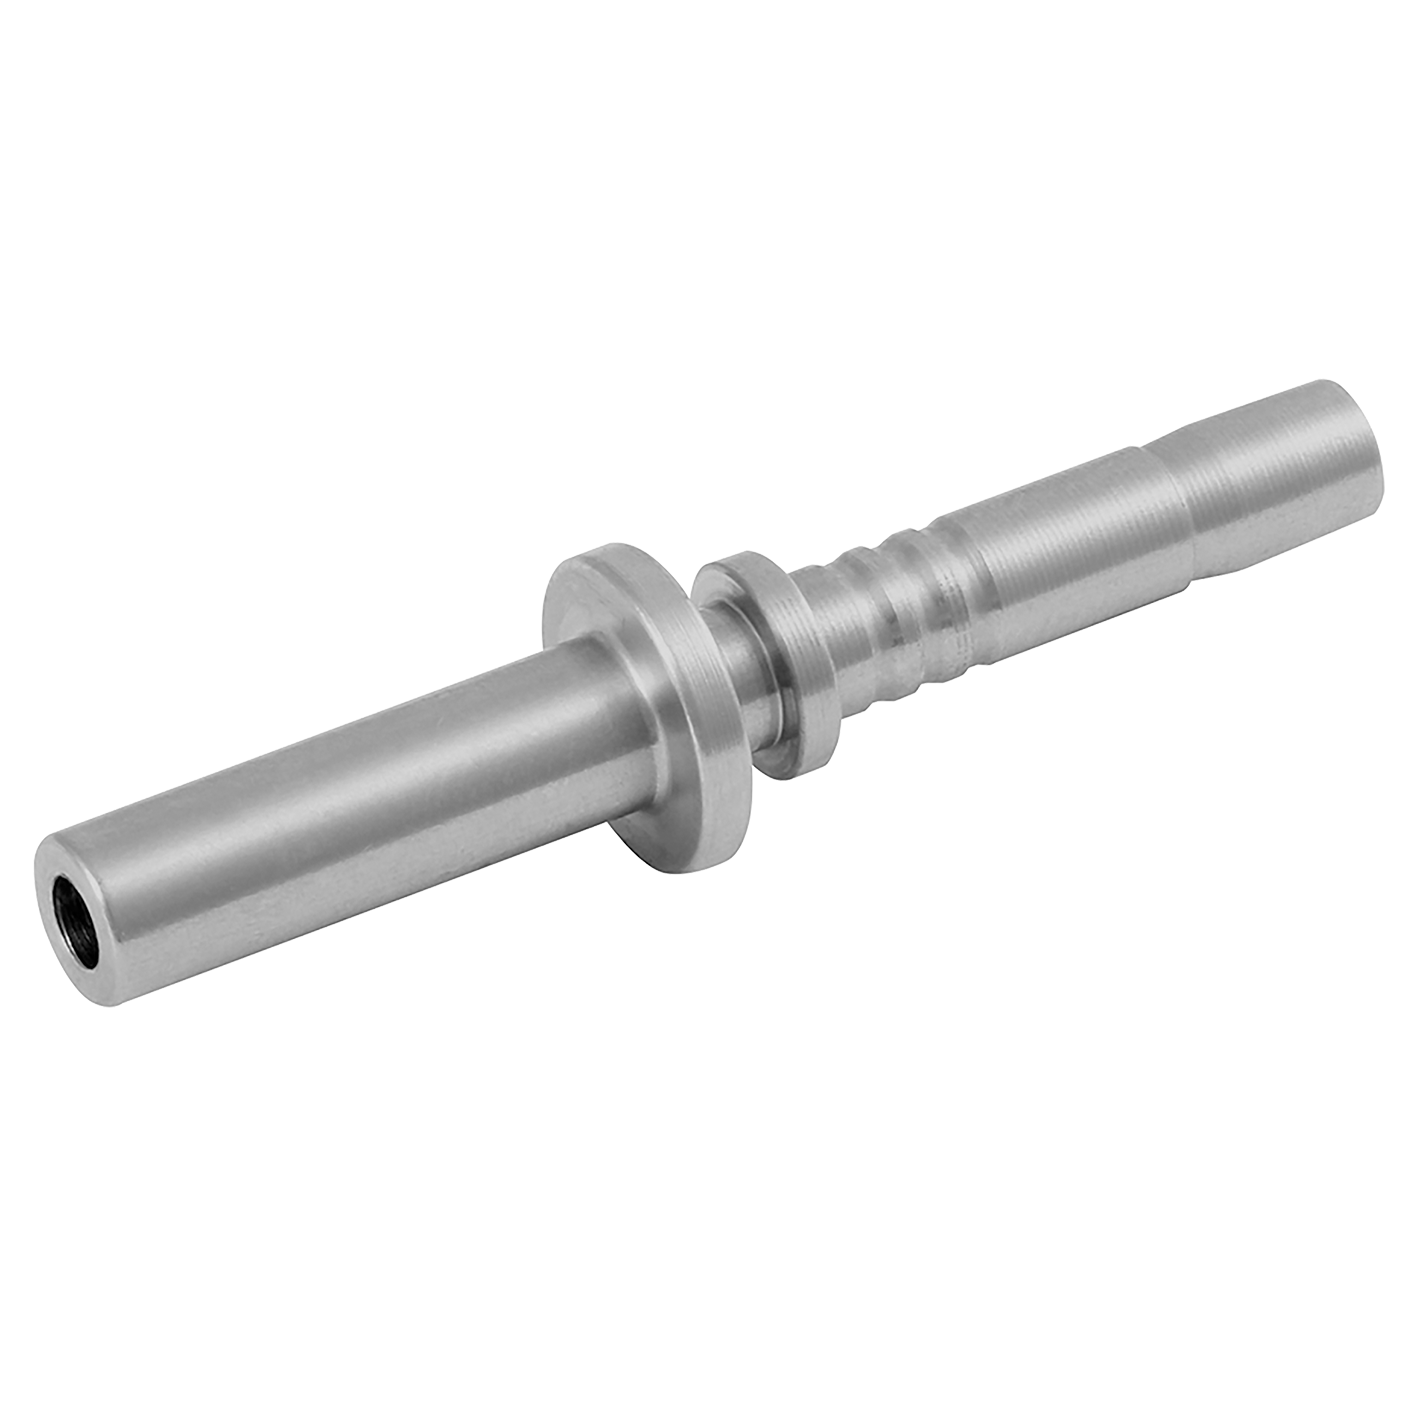 1/2 "OD PIPE CONNECTOR